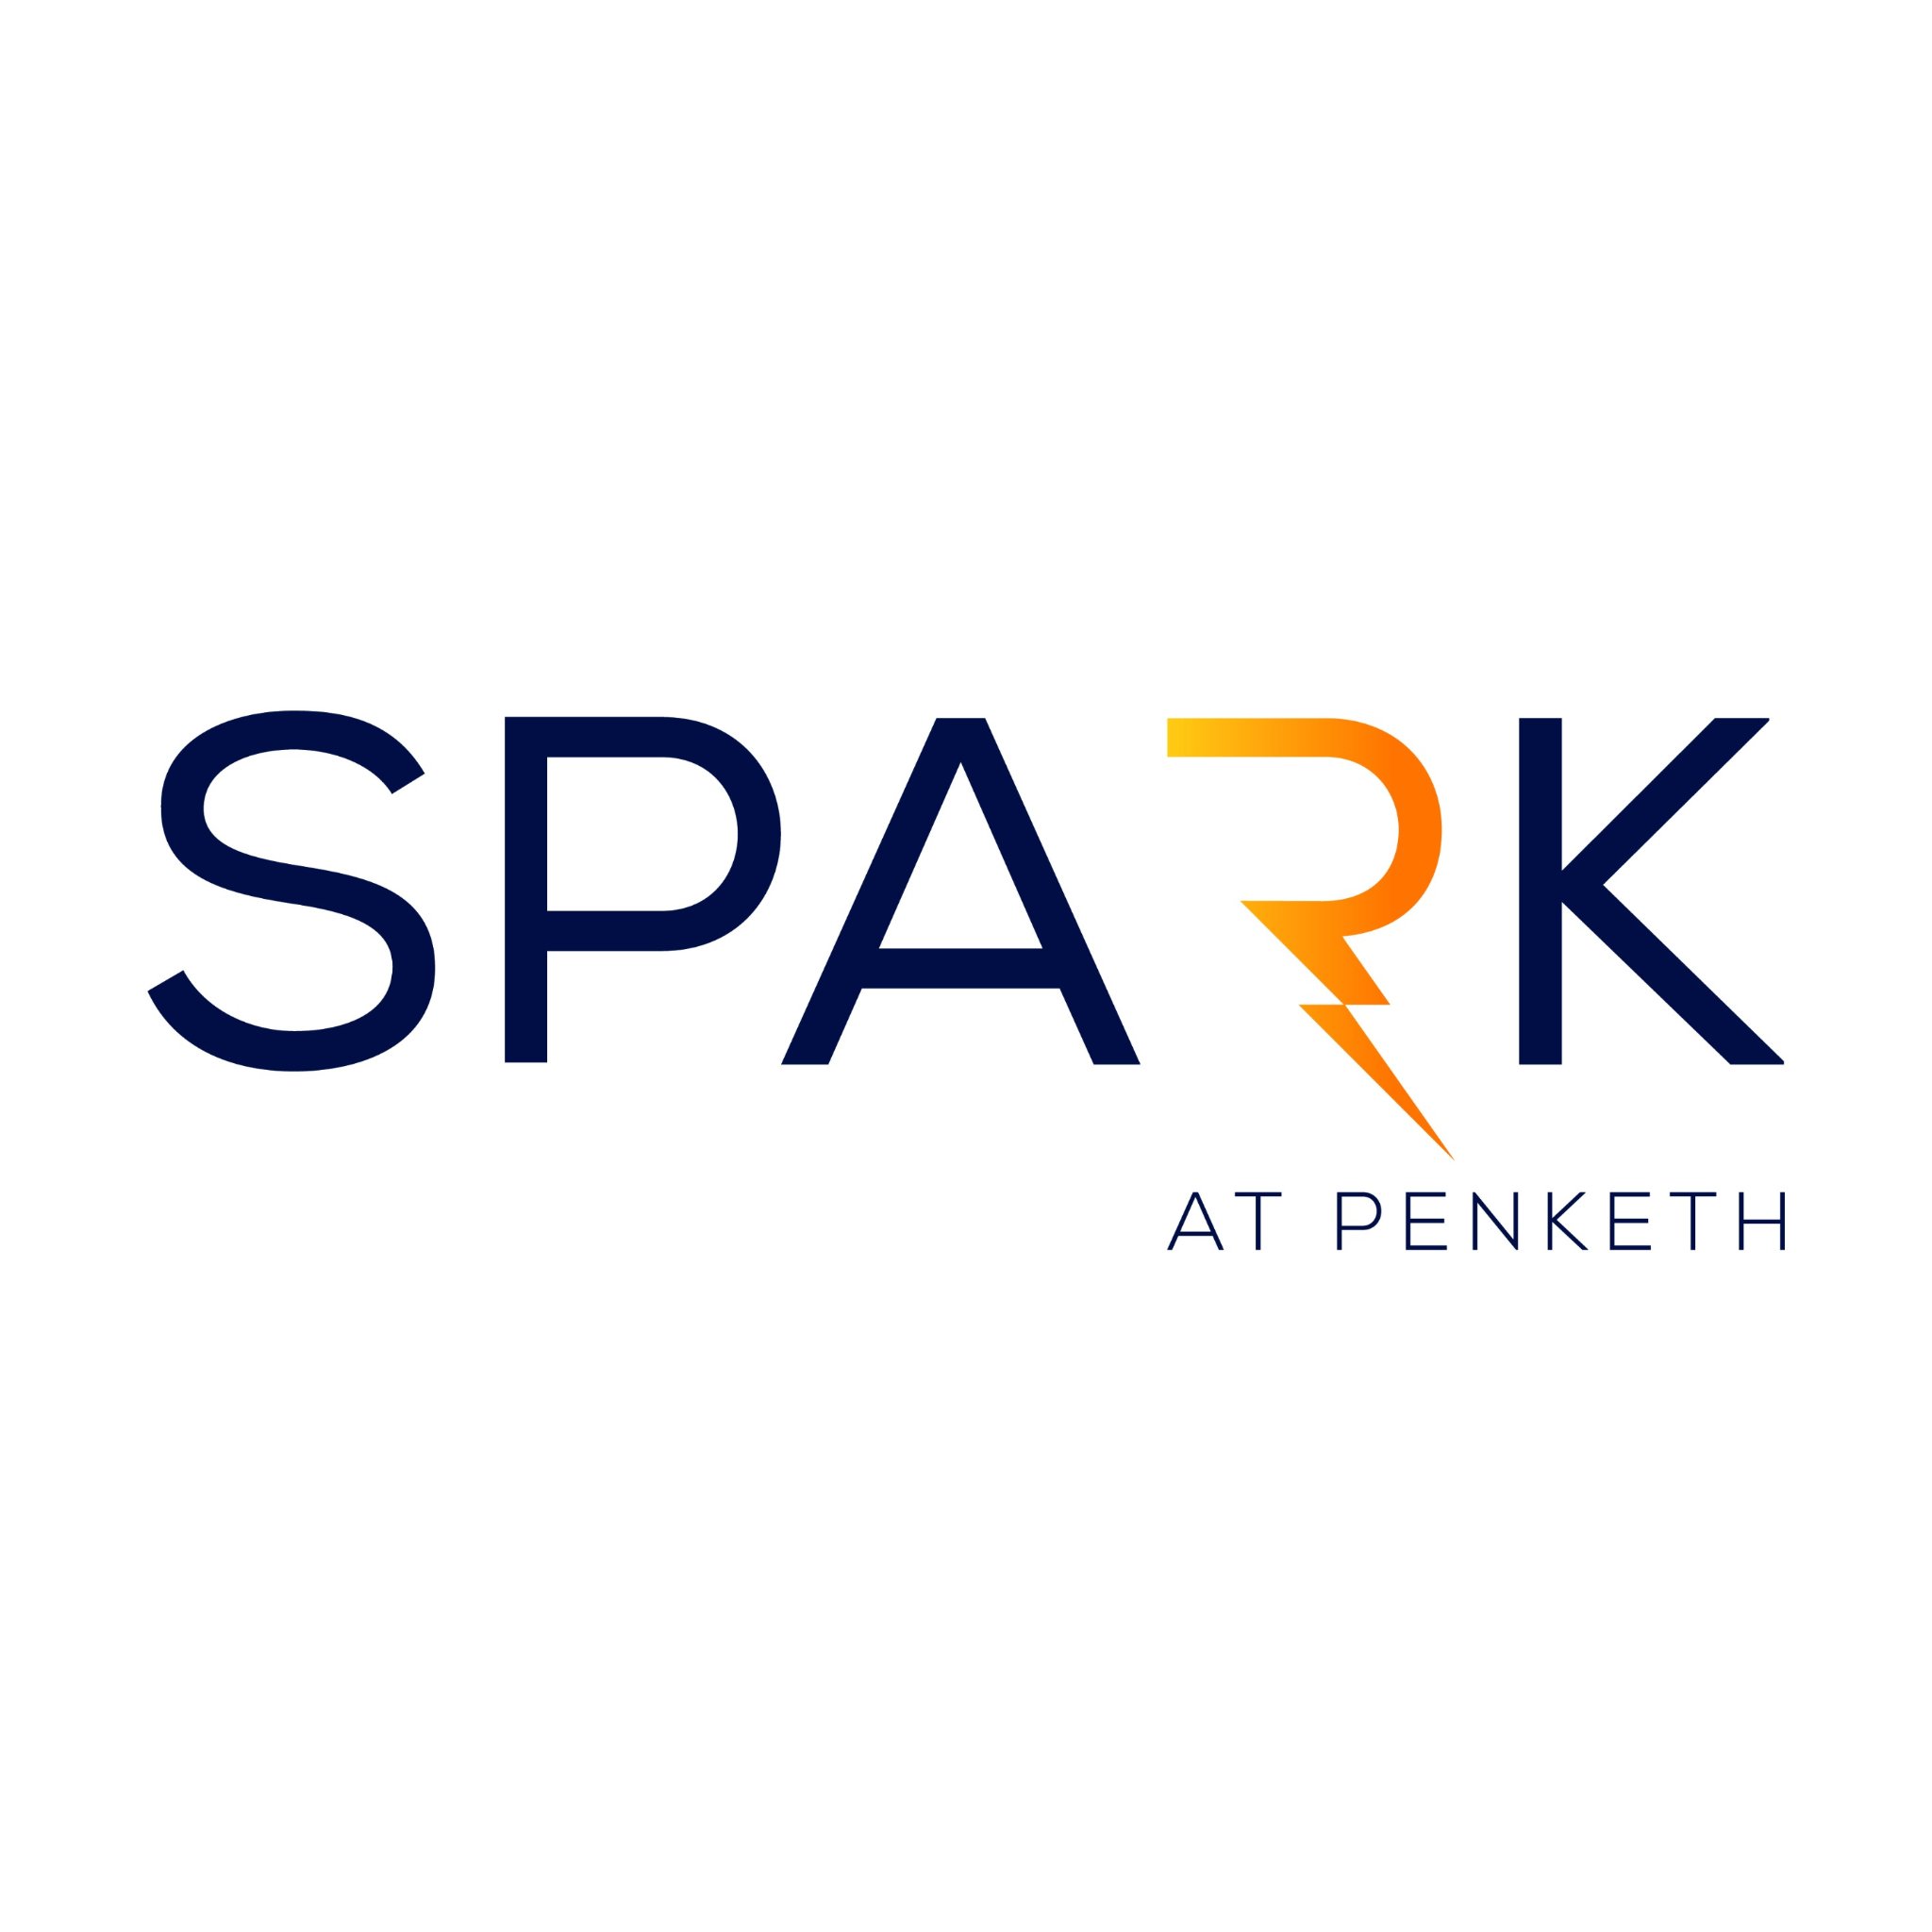 Spark is the 1st & award winning school #makerspace in UK embedding #MakerEd @PenkethSchool. With a school pathway including #Industry40 Digital Skills.